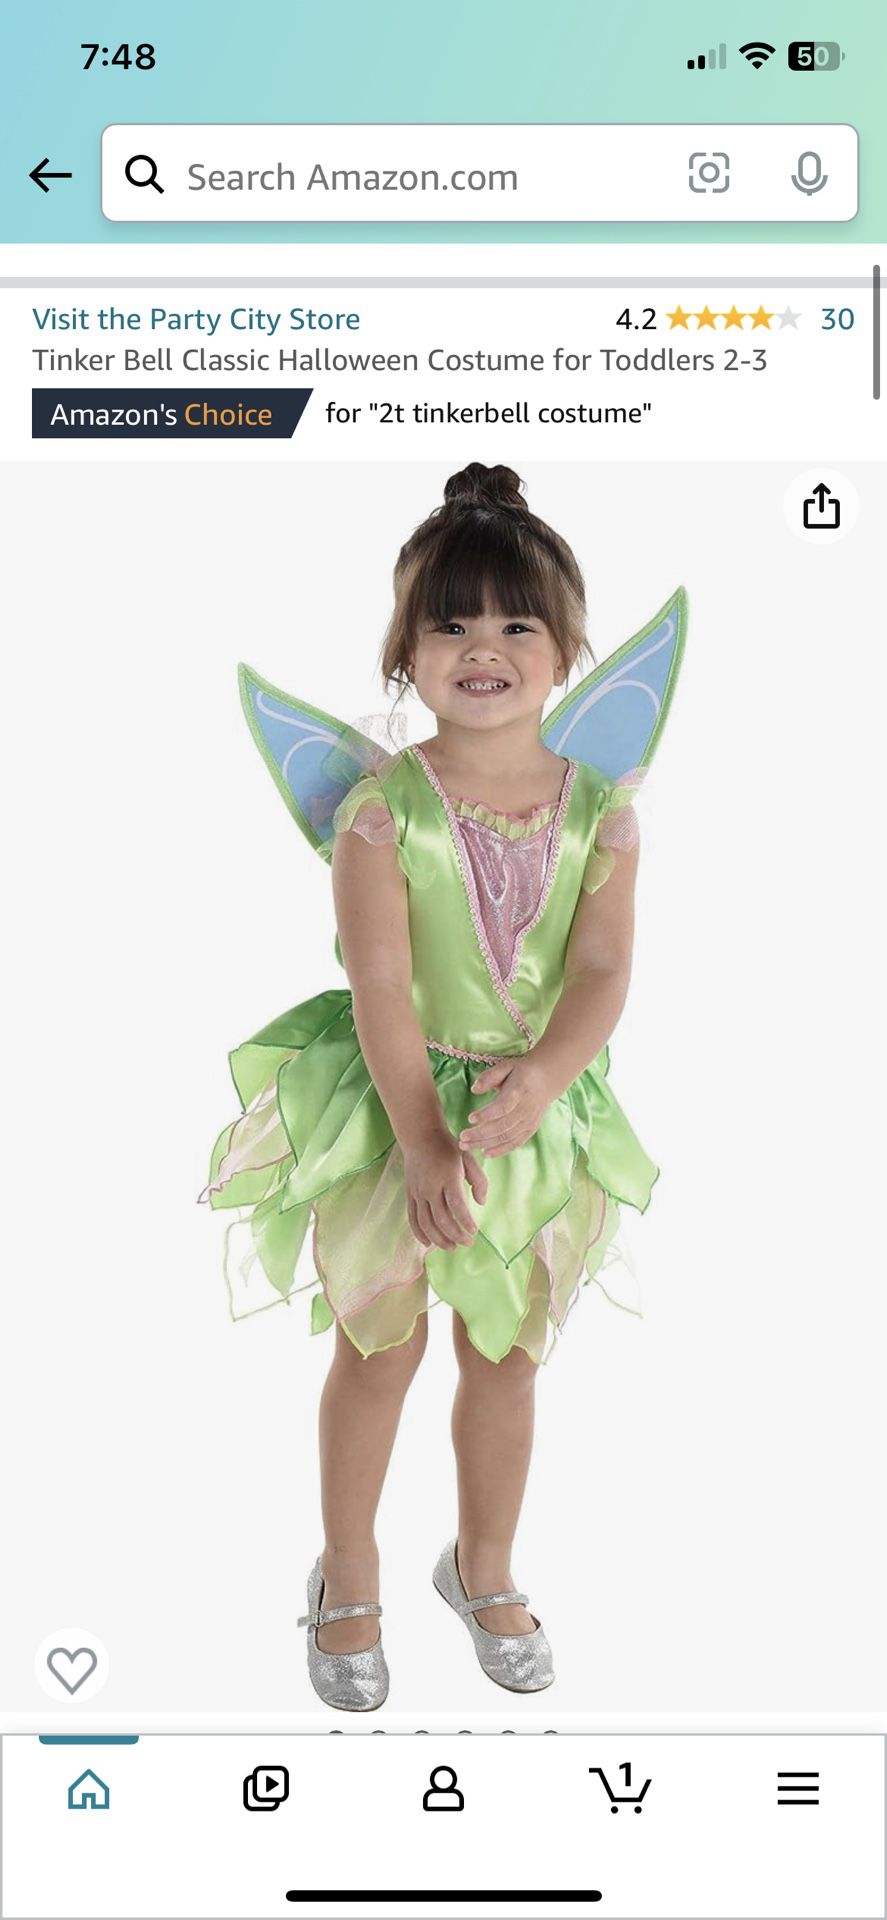 Tinker Bell Costume for Toddlers 2-3